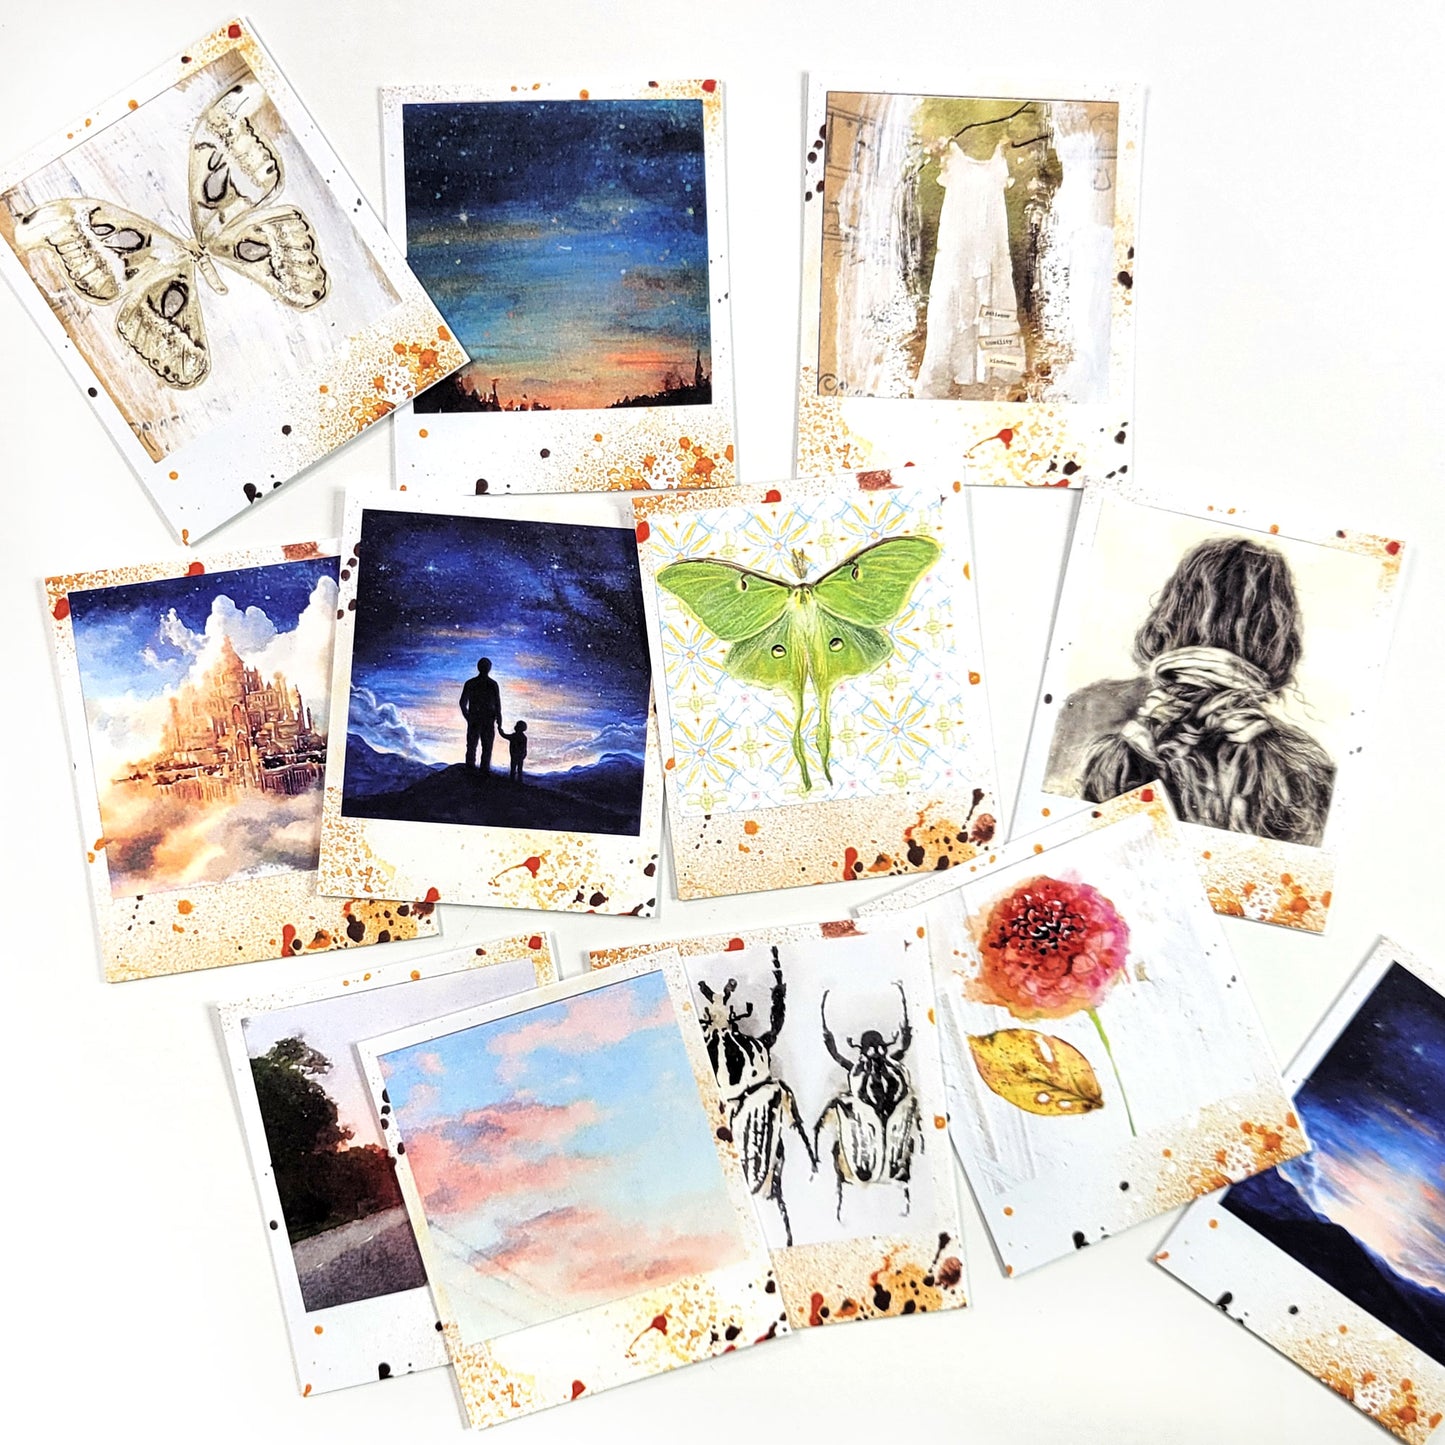 Beautiful 2 Purpose and Beauty kit ADD ON - Polaroid images -digital download